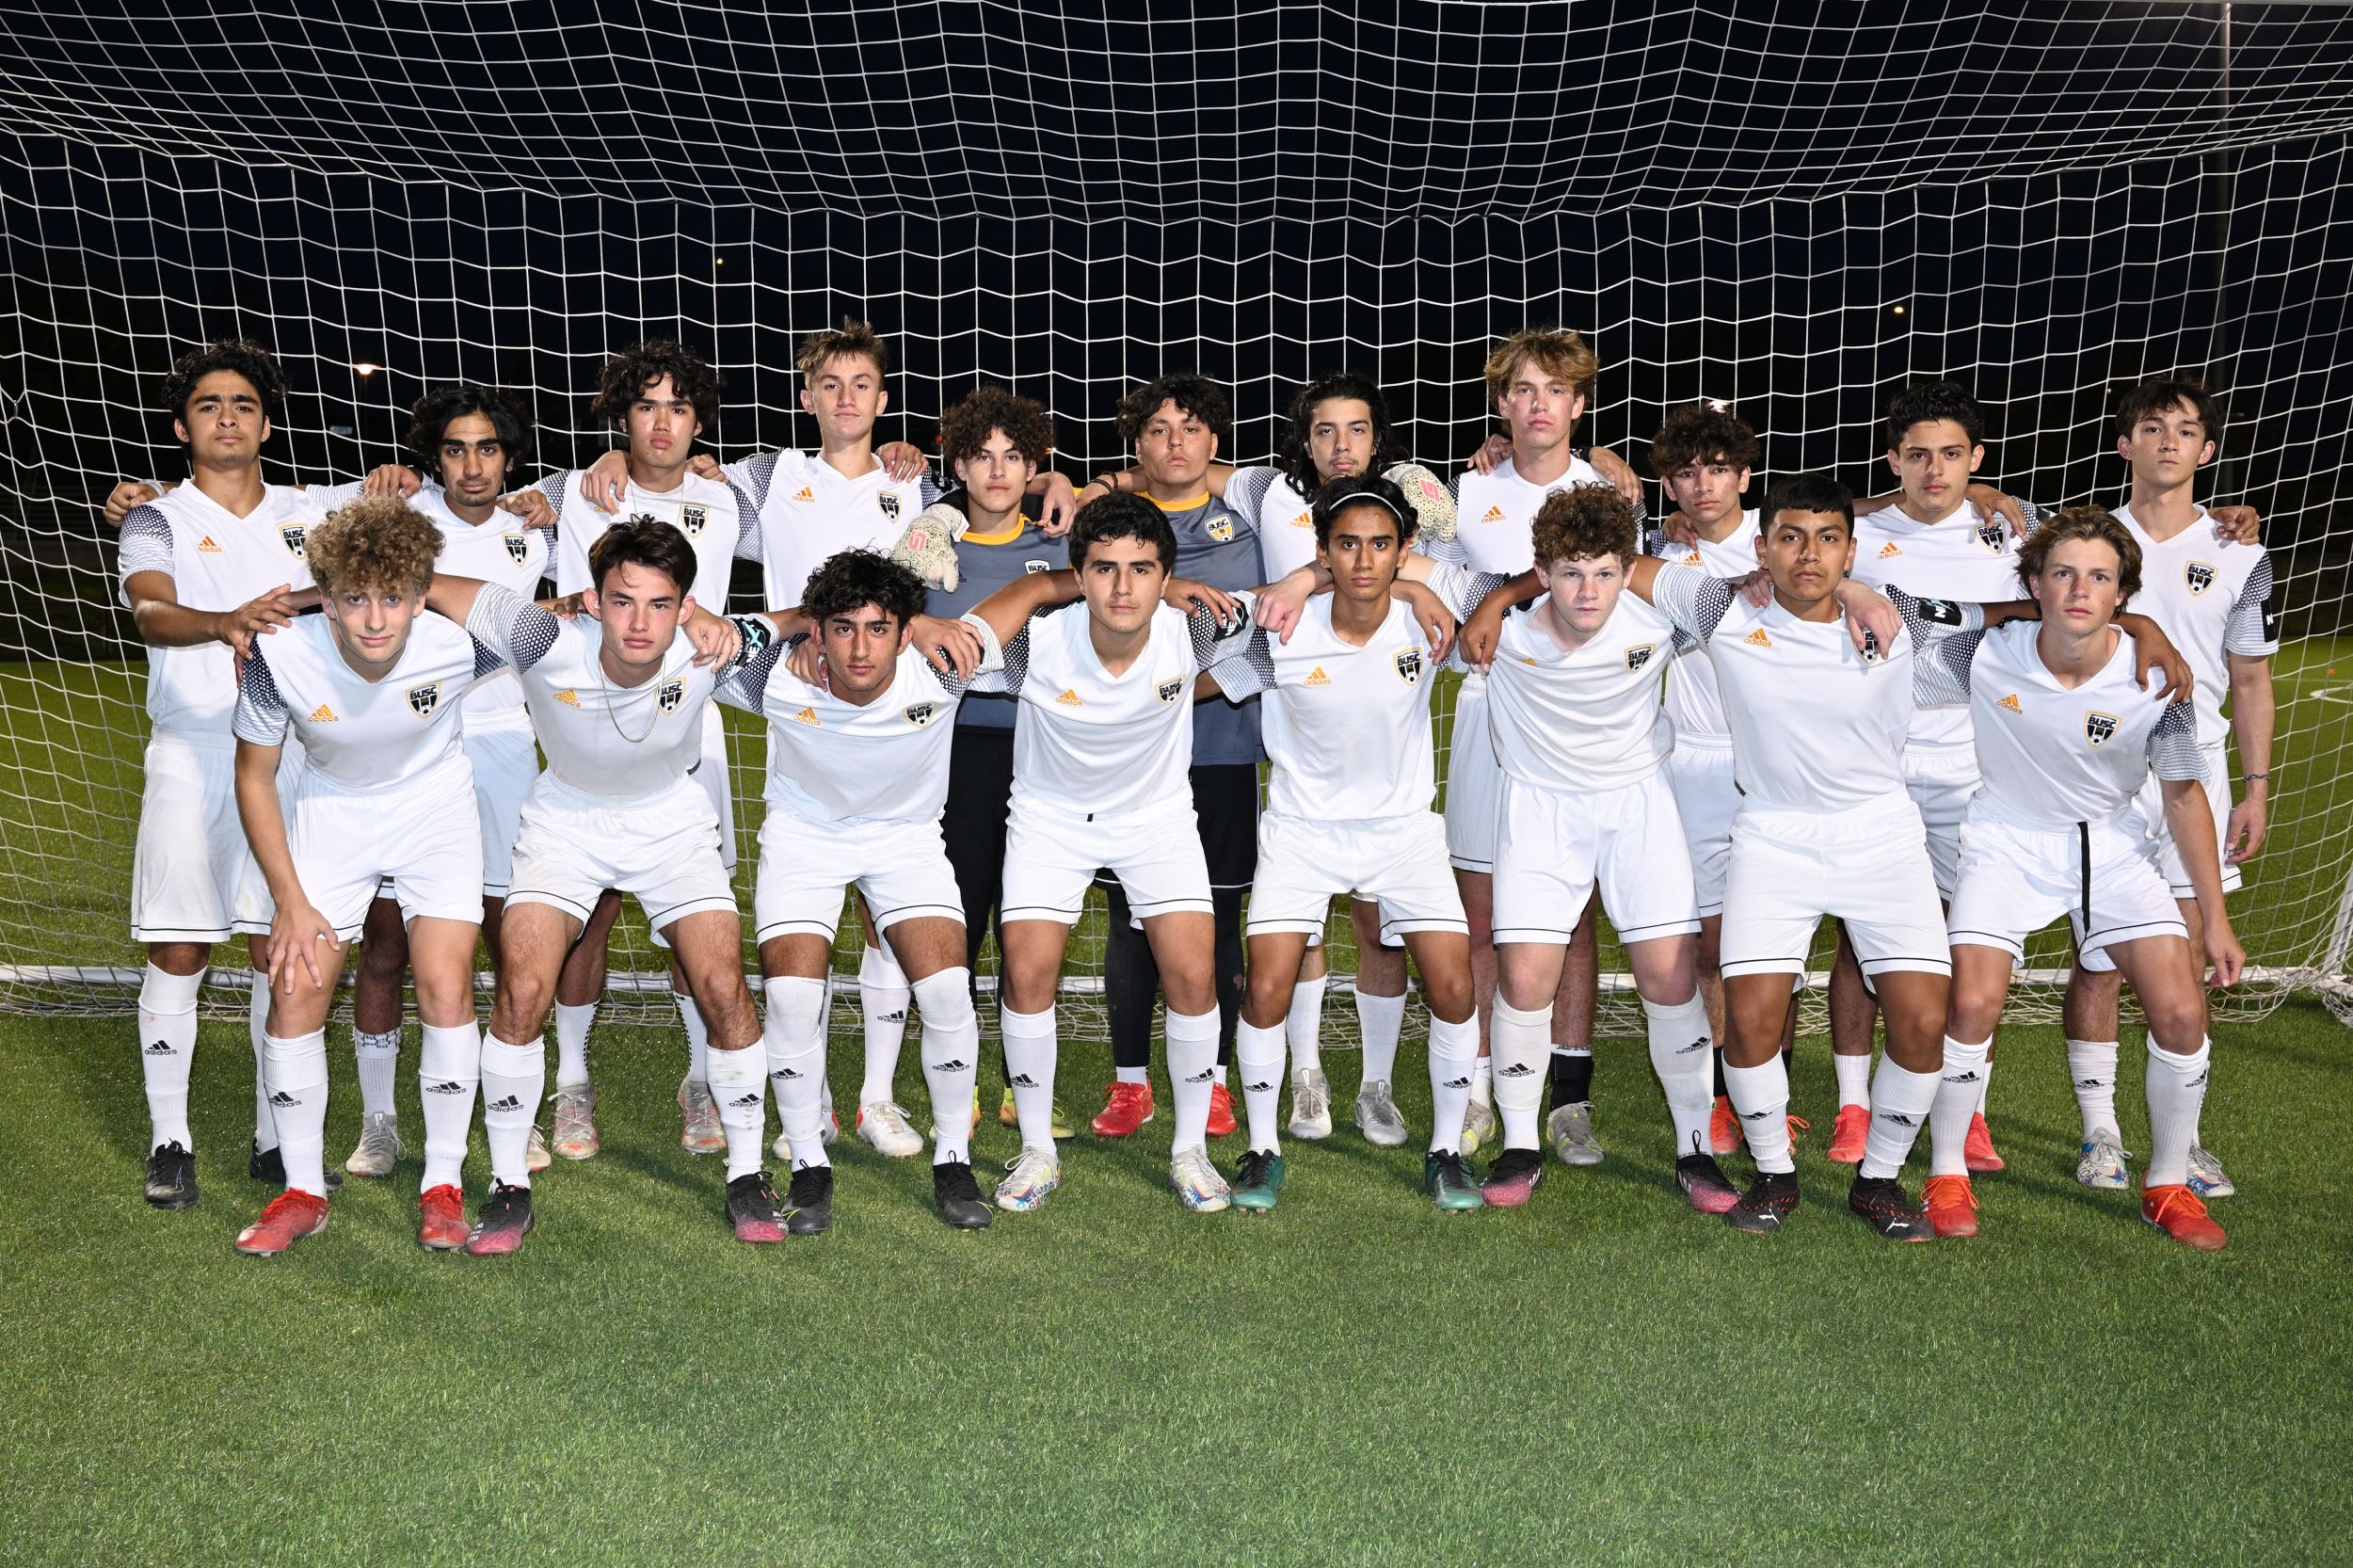 BUSC U-16 MLS NEXT Cup playoff run comes to an end